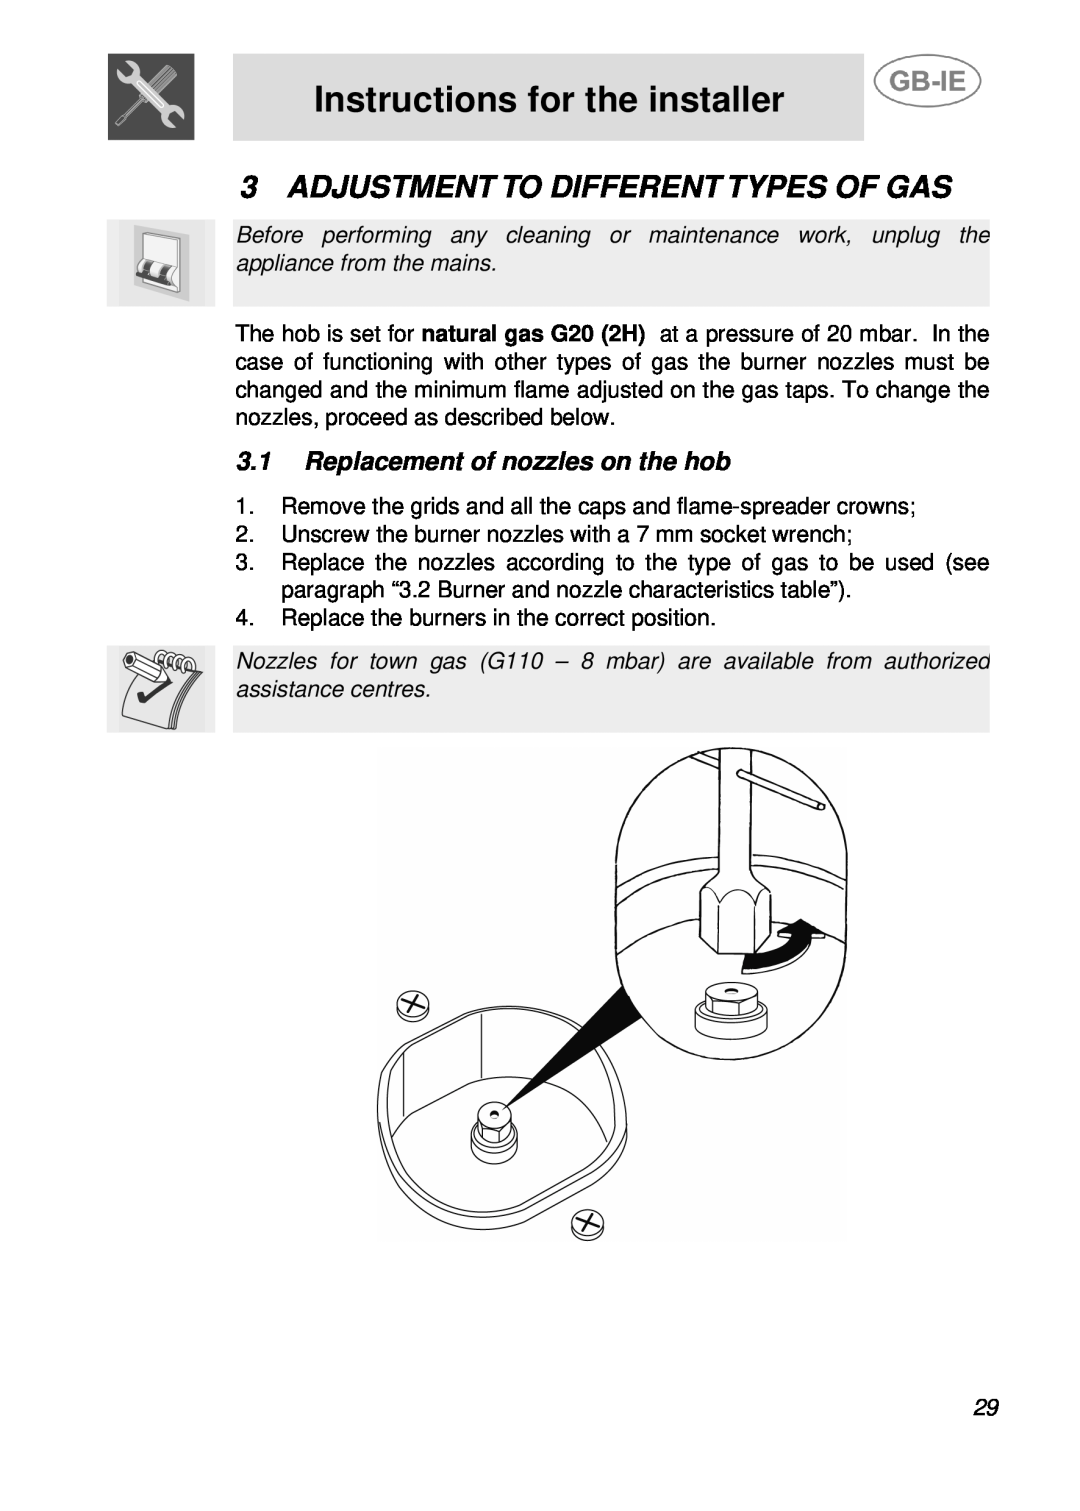 Smeg PGF95BE-1 Adjustment To Different Types Of Gas, Replacement of nozzles on the hob, Instructions for the installer 